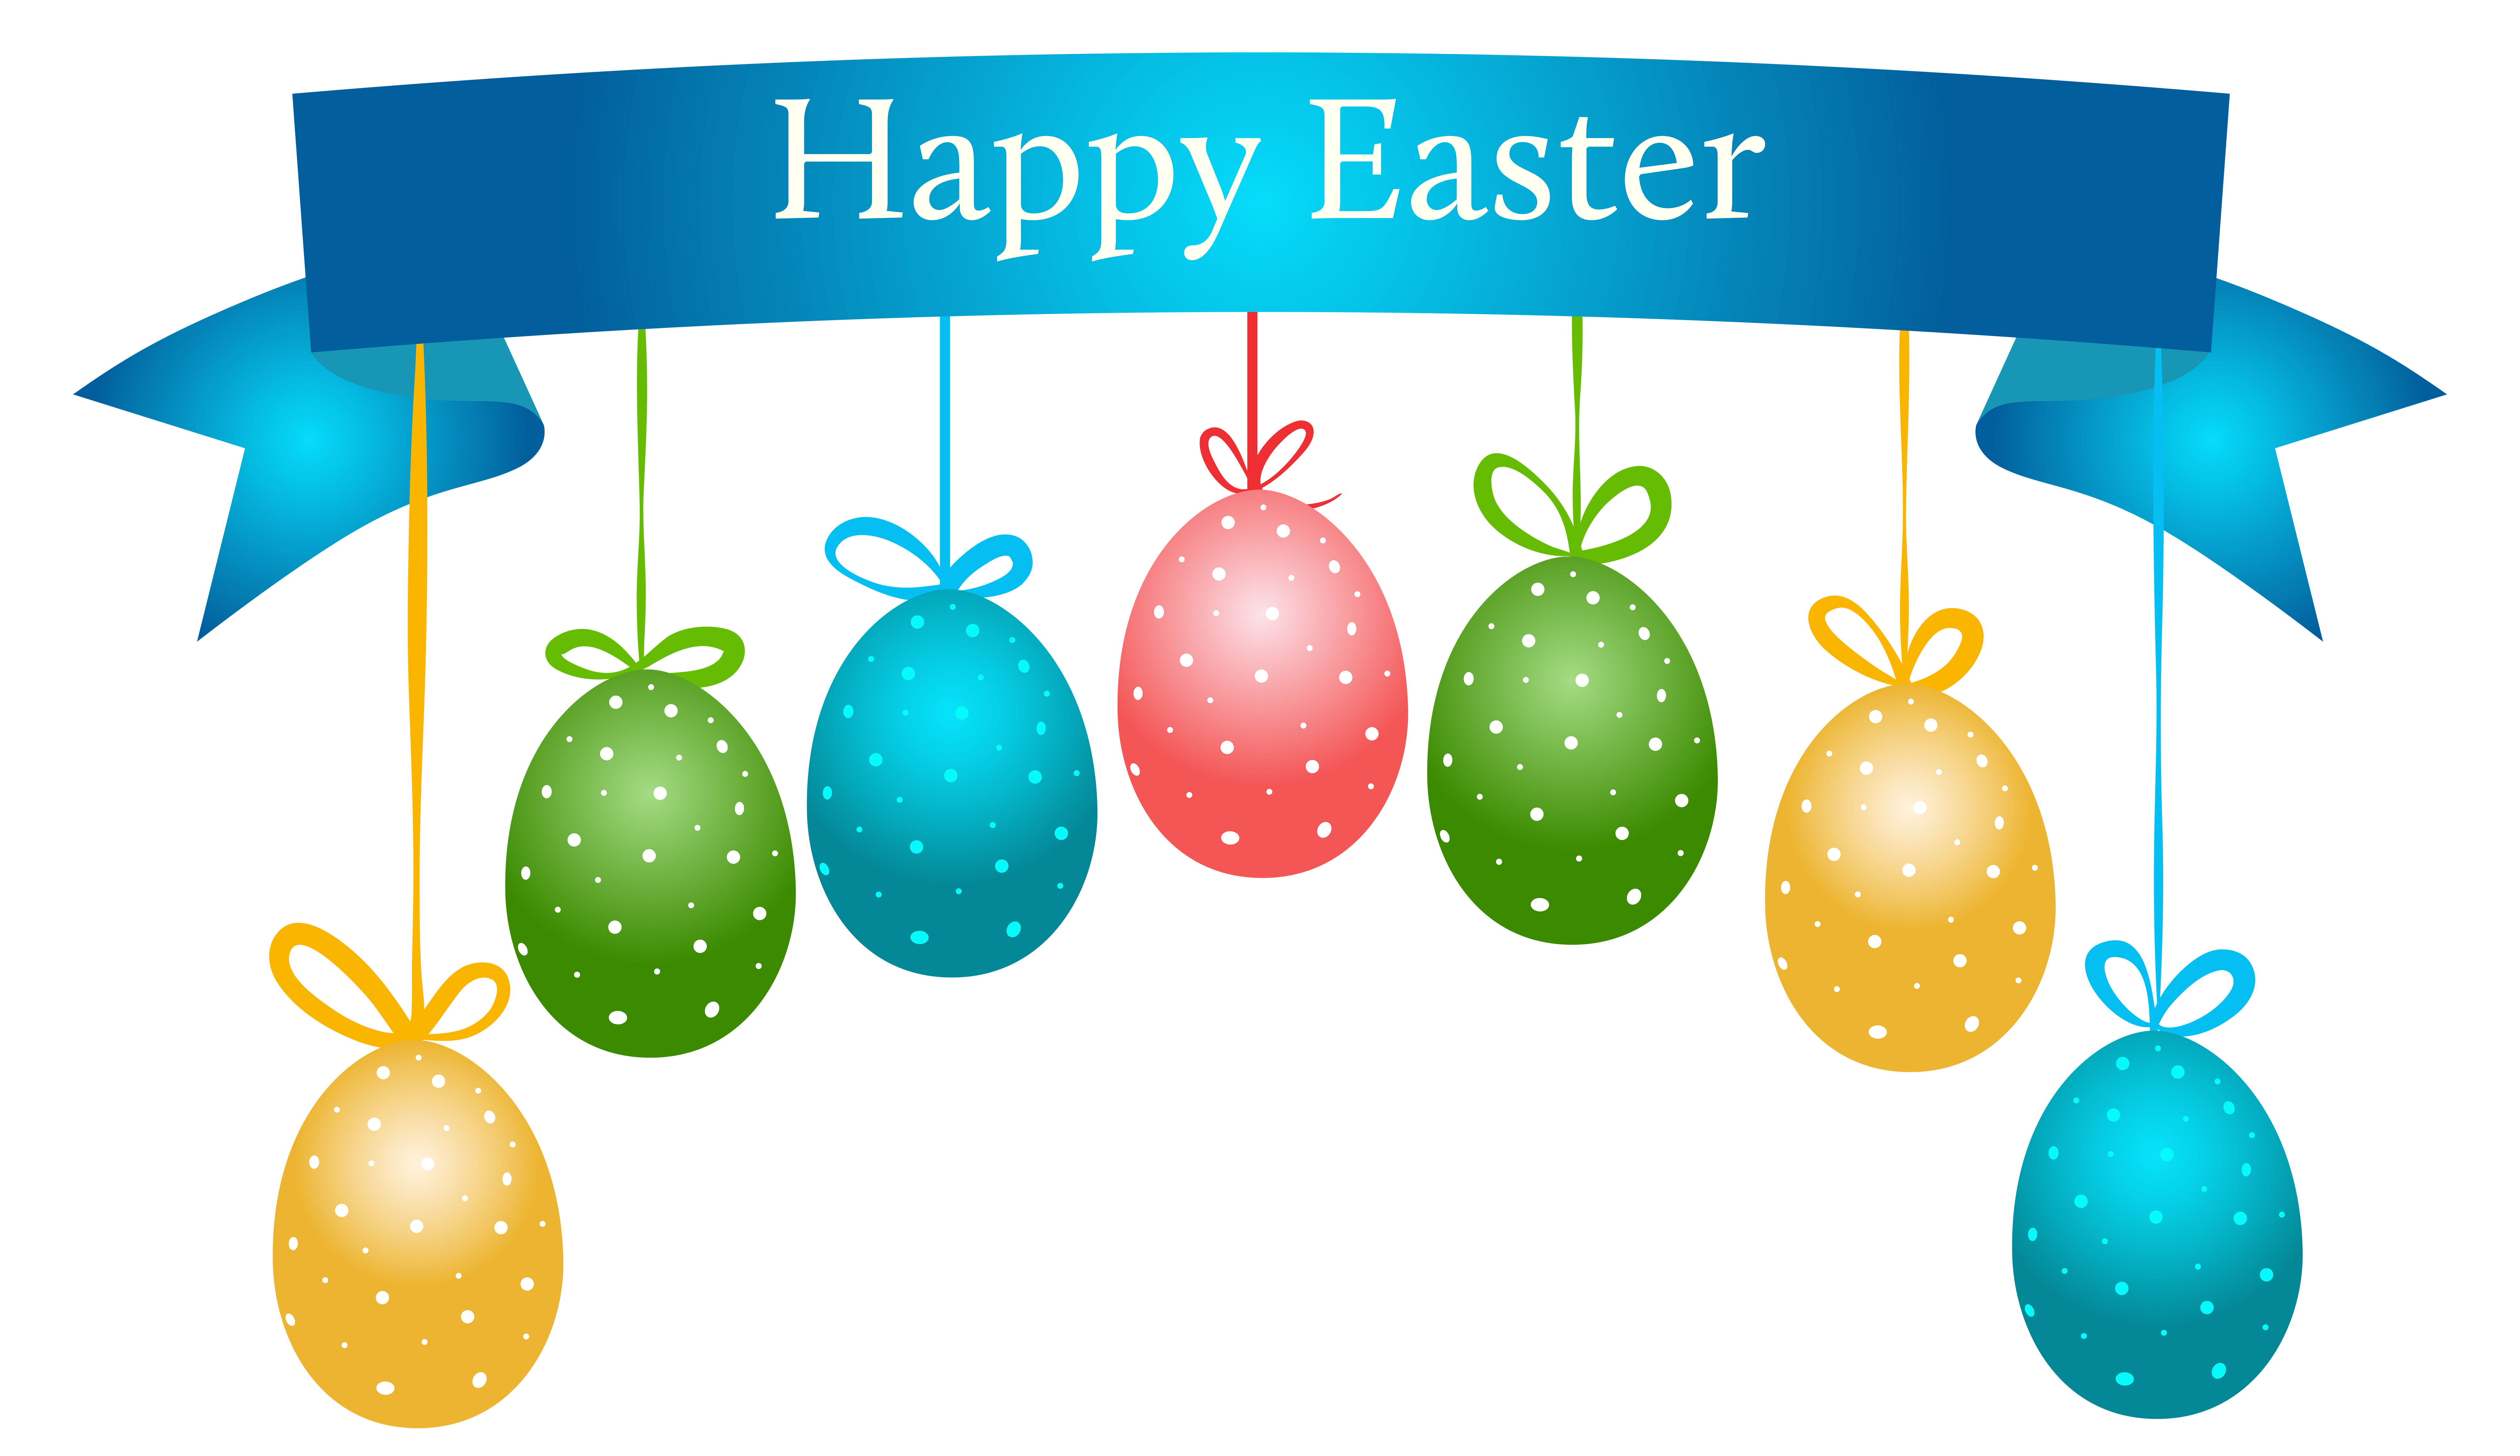 Excited clipart joyfulness. Happy easter banner with